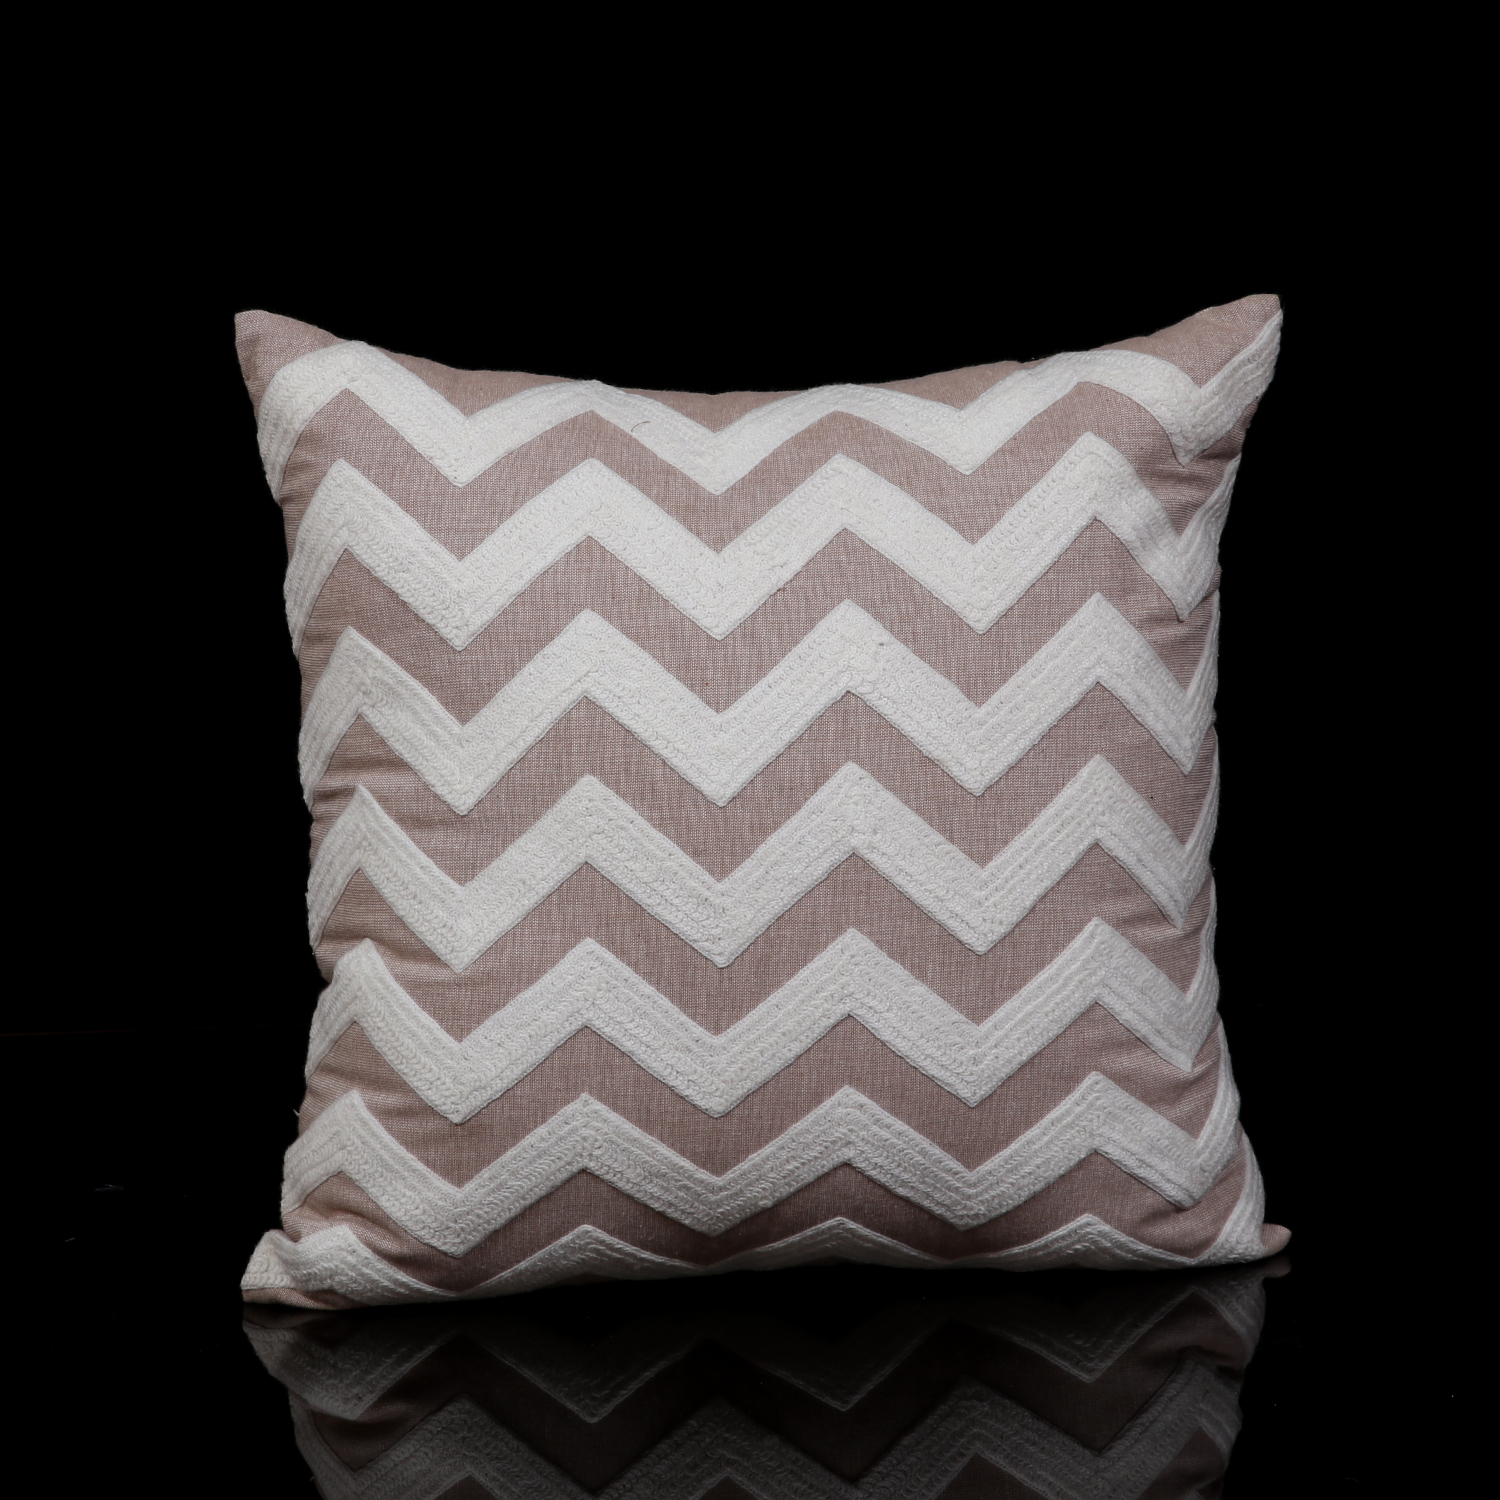 EMBROIDERED CHEVRON PATTERN PILLOW